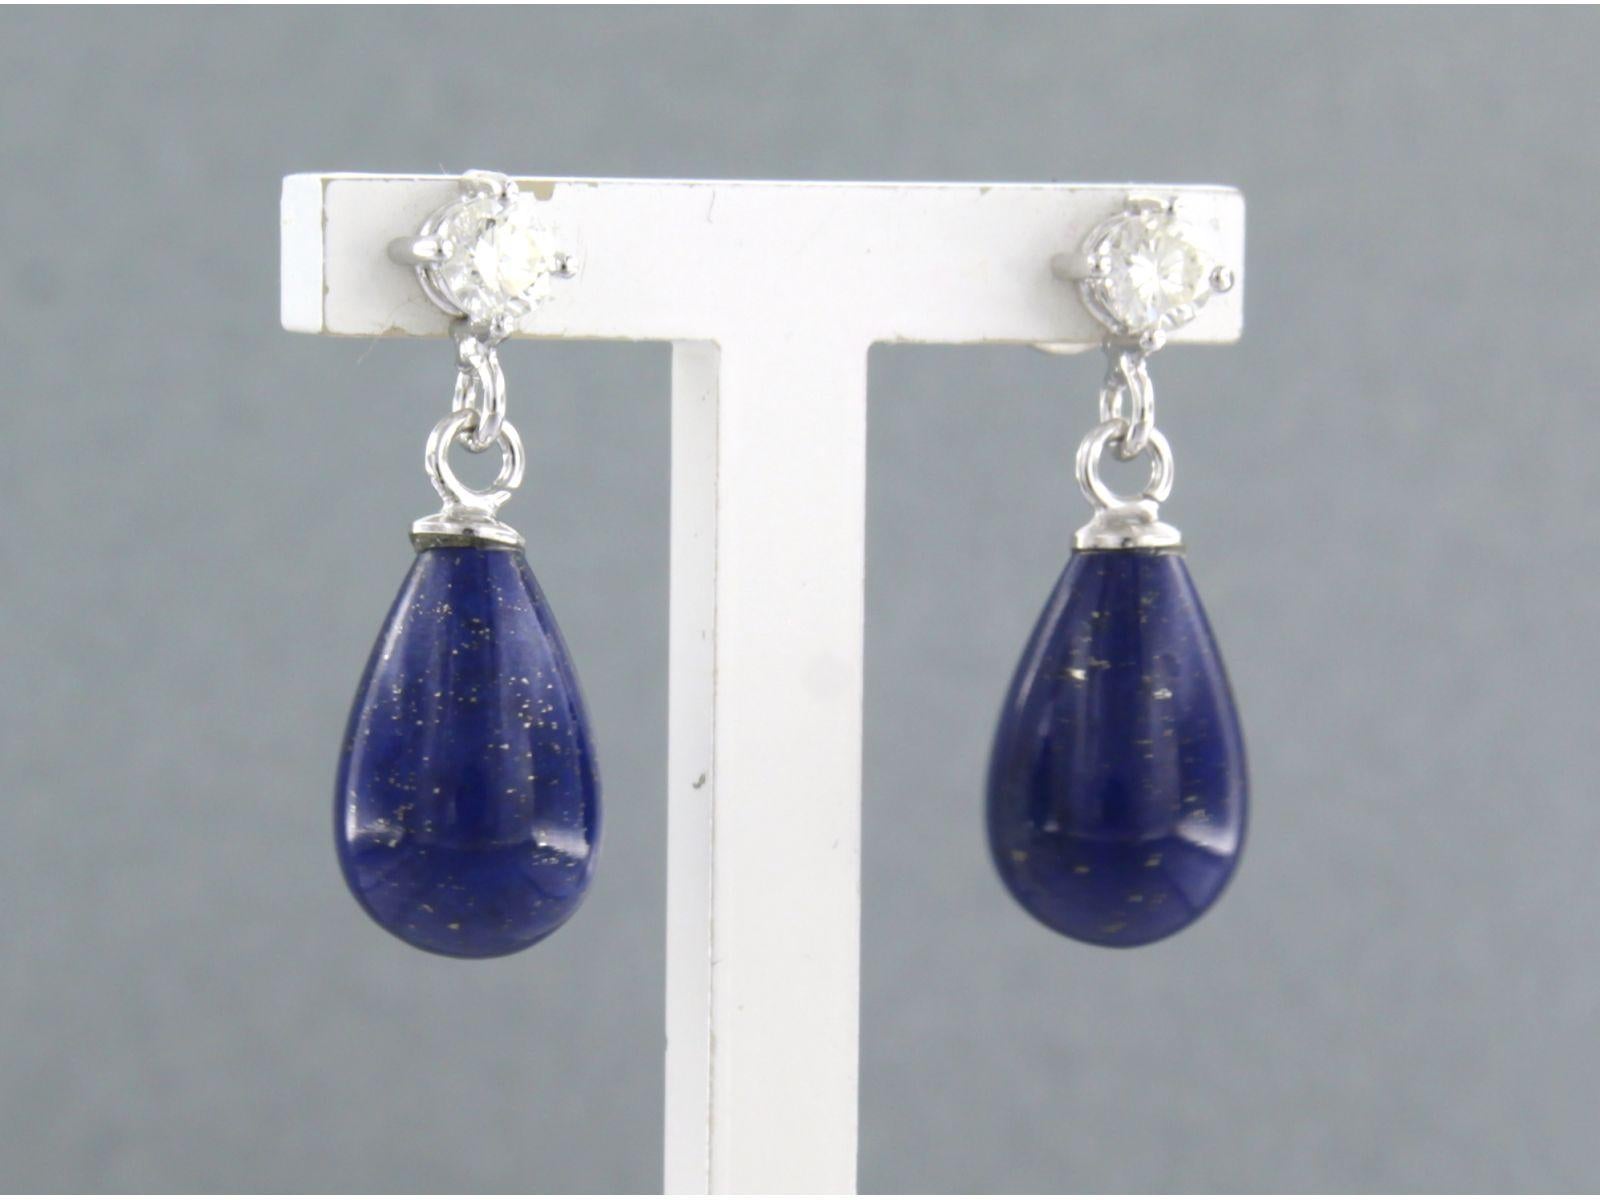 Brilliant Cut Earrings set with lapis lazuli and diamonds 18k white gold For Sale